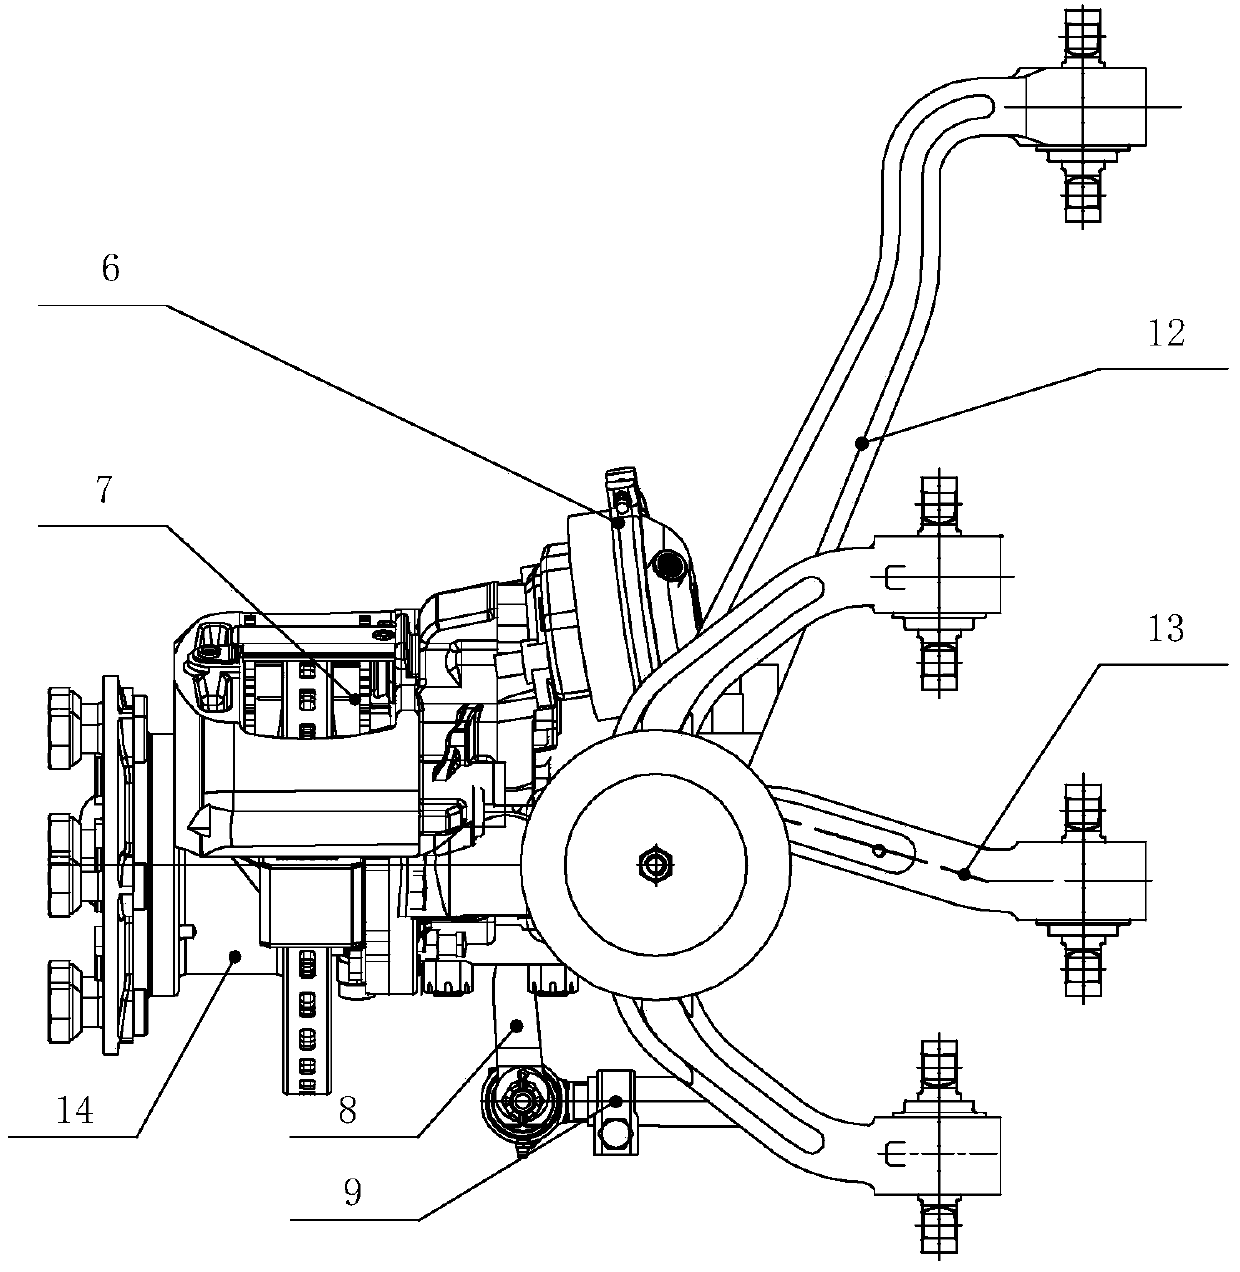 Independent suspension front axle with virtual kingpin structure